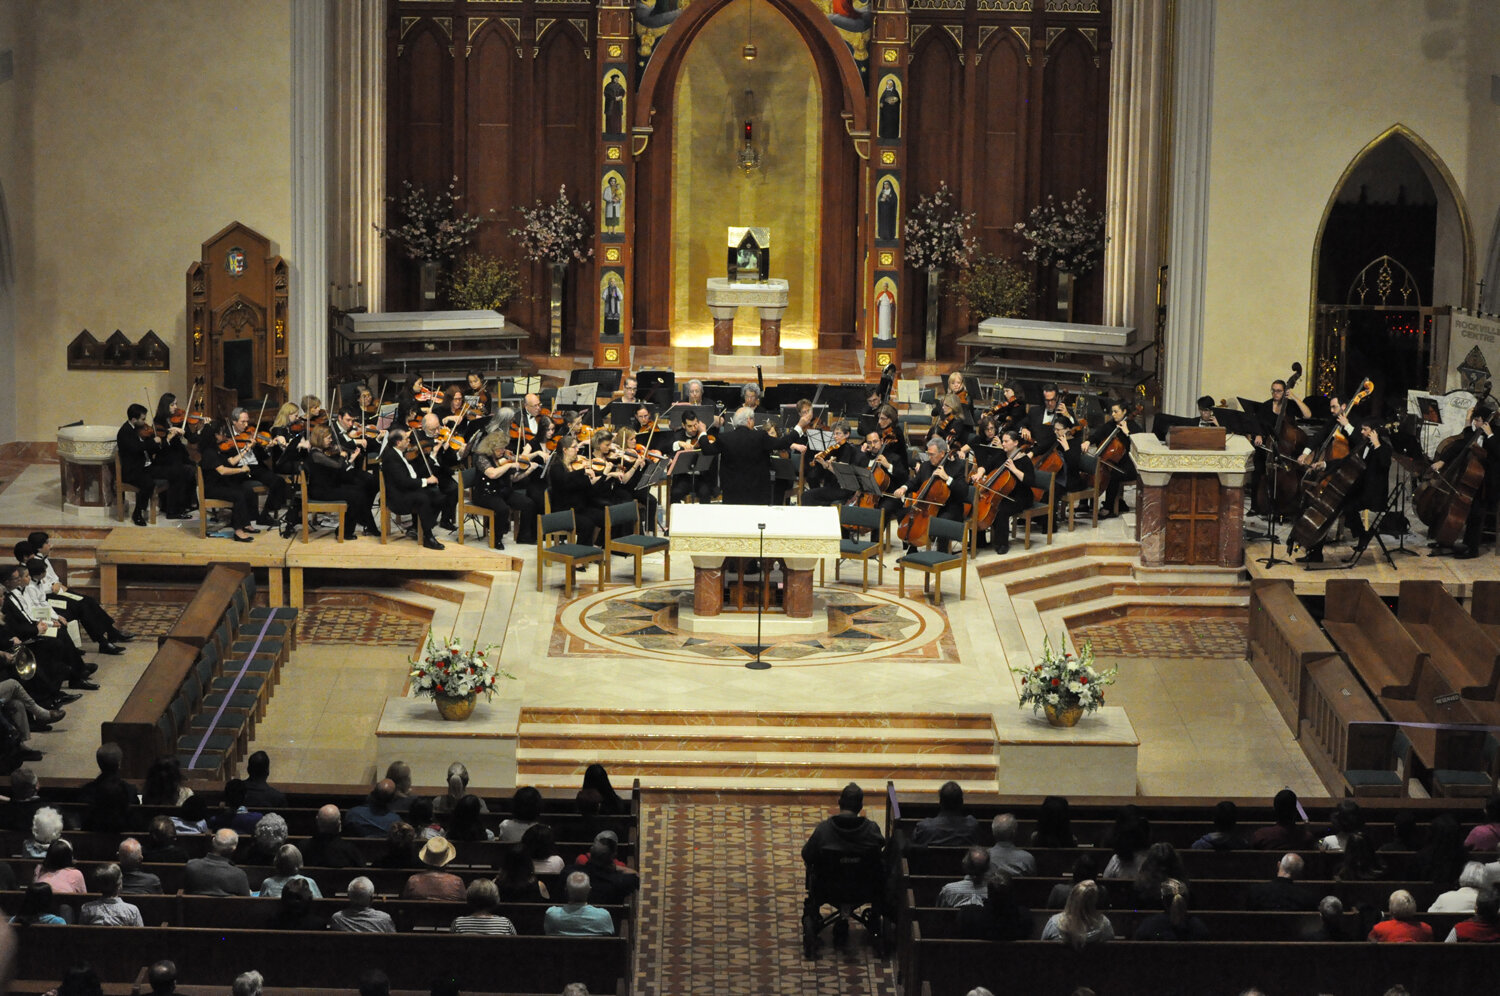 Maestro Scott Jackson Wiley will pick up his baton one more time as conductor of the South Shore Symphony Orchestra  for their annual concert at St. Agnes Cathedral.